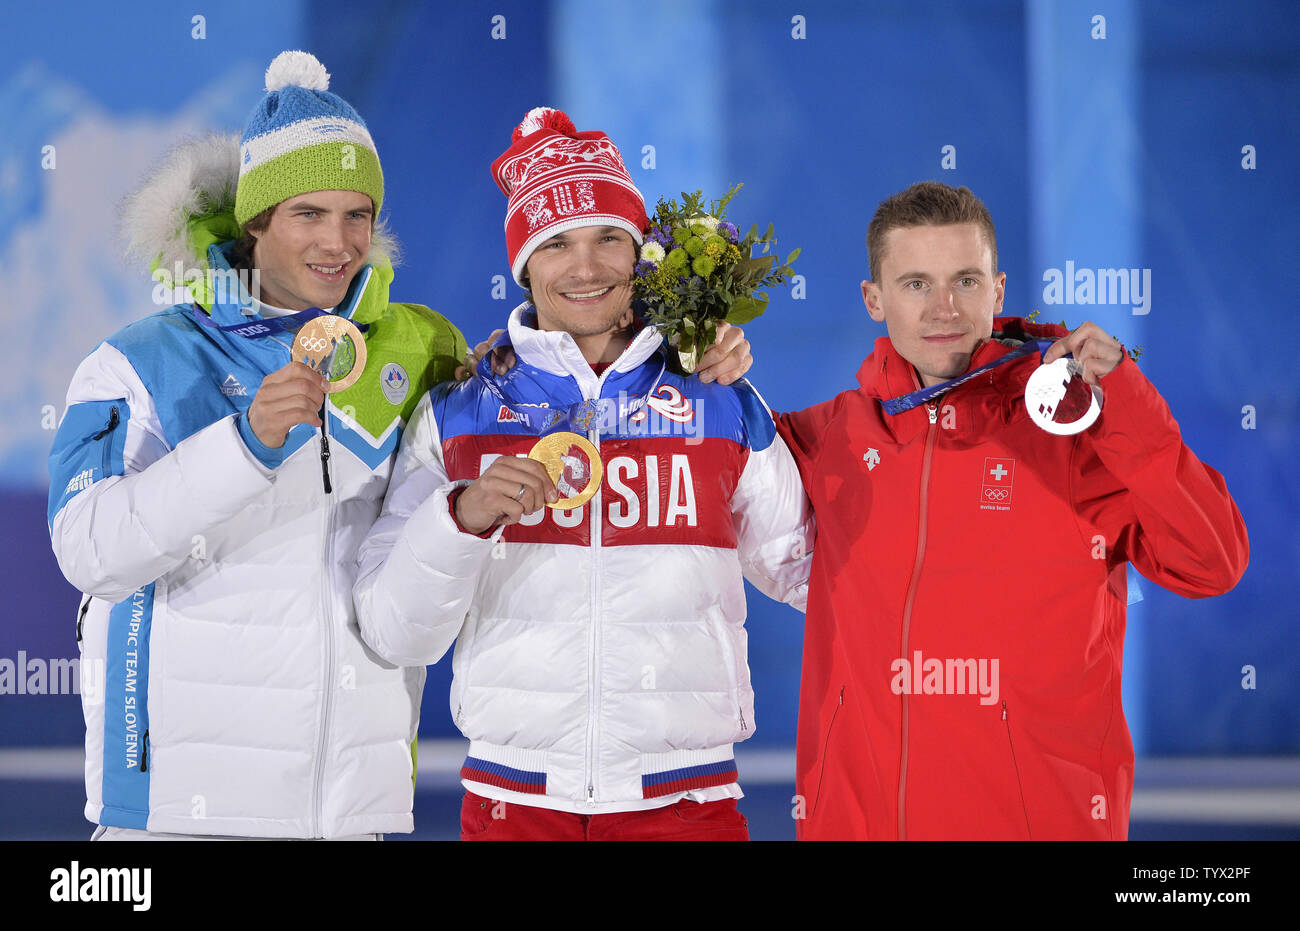 Slovenia's Zan Kosir (L-R), Russia's Vic Wild and Switzerland's Nevin Galmarini celebrate their silver, gold and bronze medals during the victory ceremony for men's snowboard parallel giant slalom at the Sochi 2014 Winter Olympics on February 19, 2014 in Sochi, Russia.      UPI/Brian Kersey Stock Photo